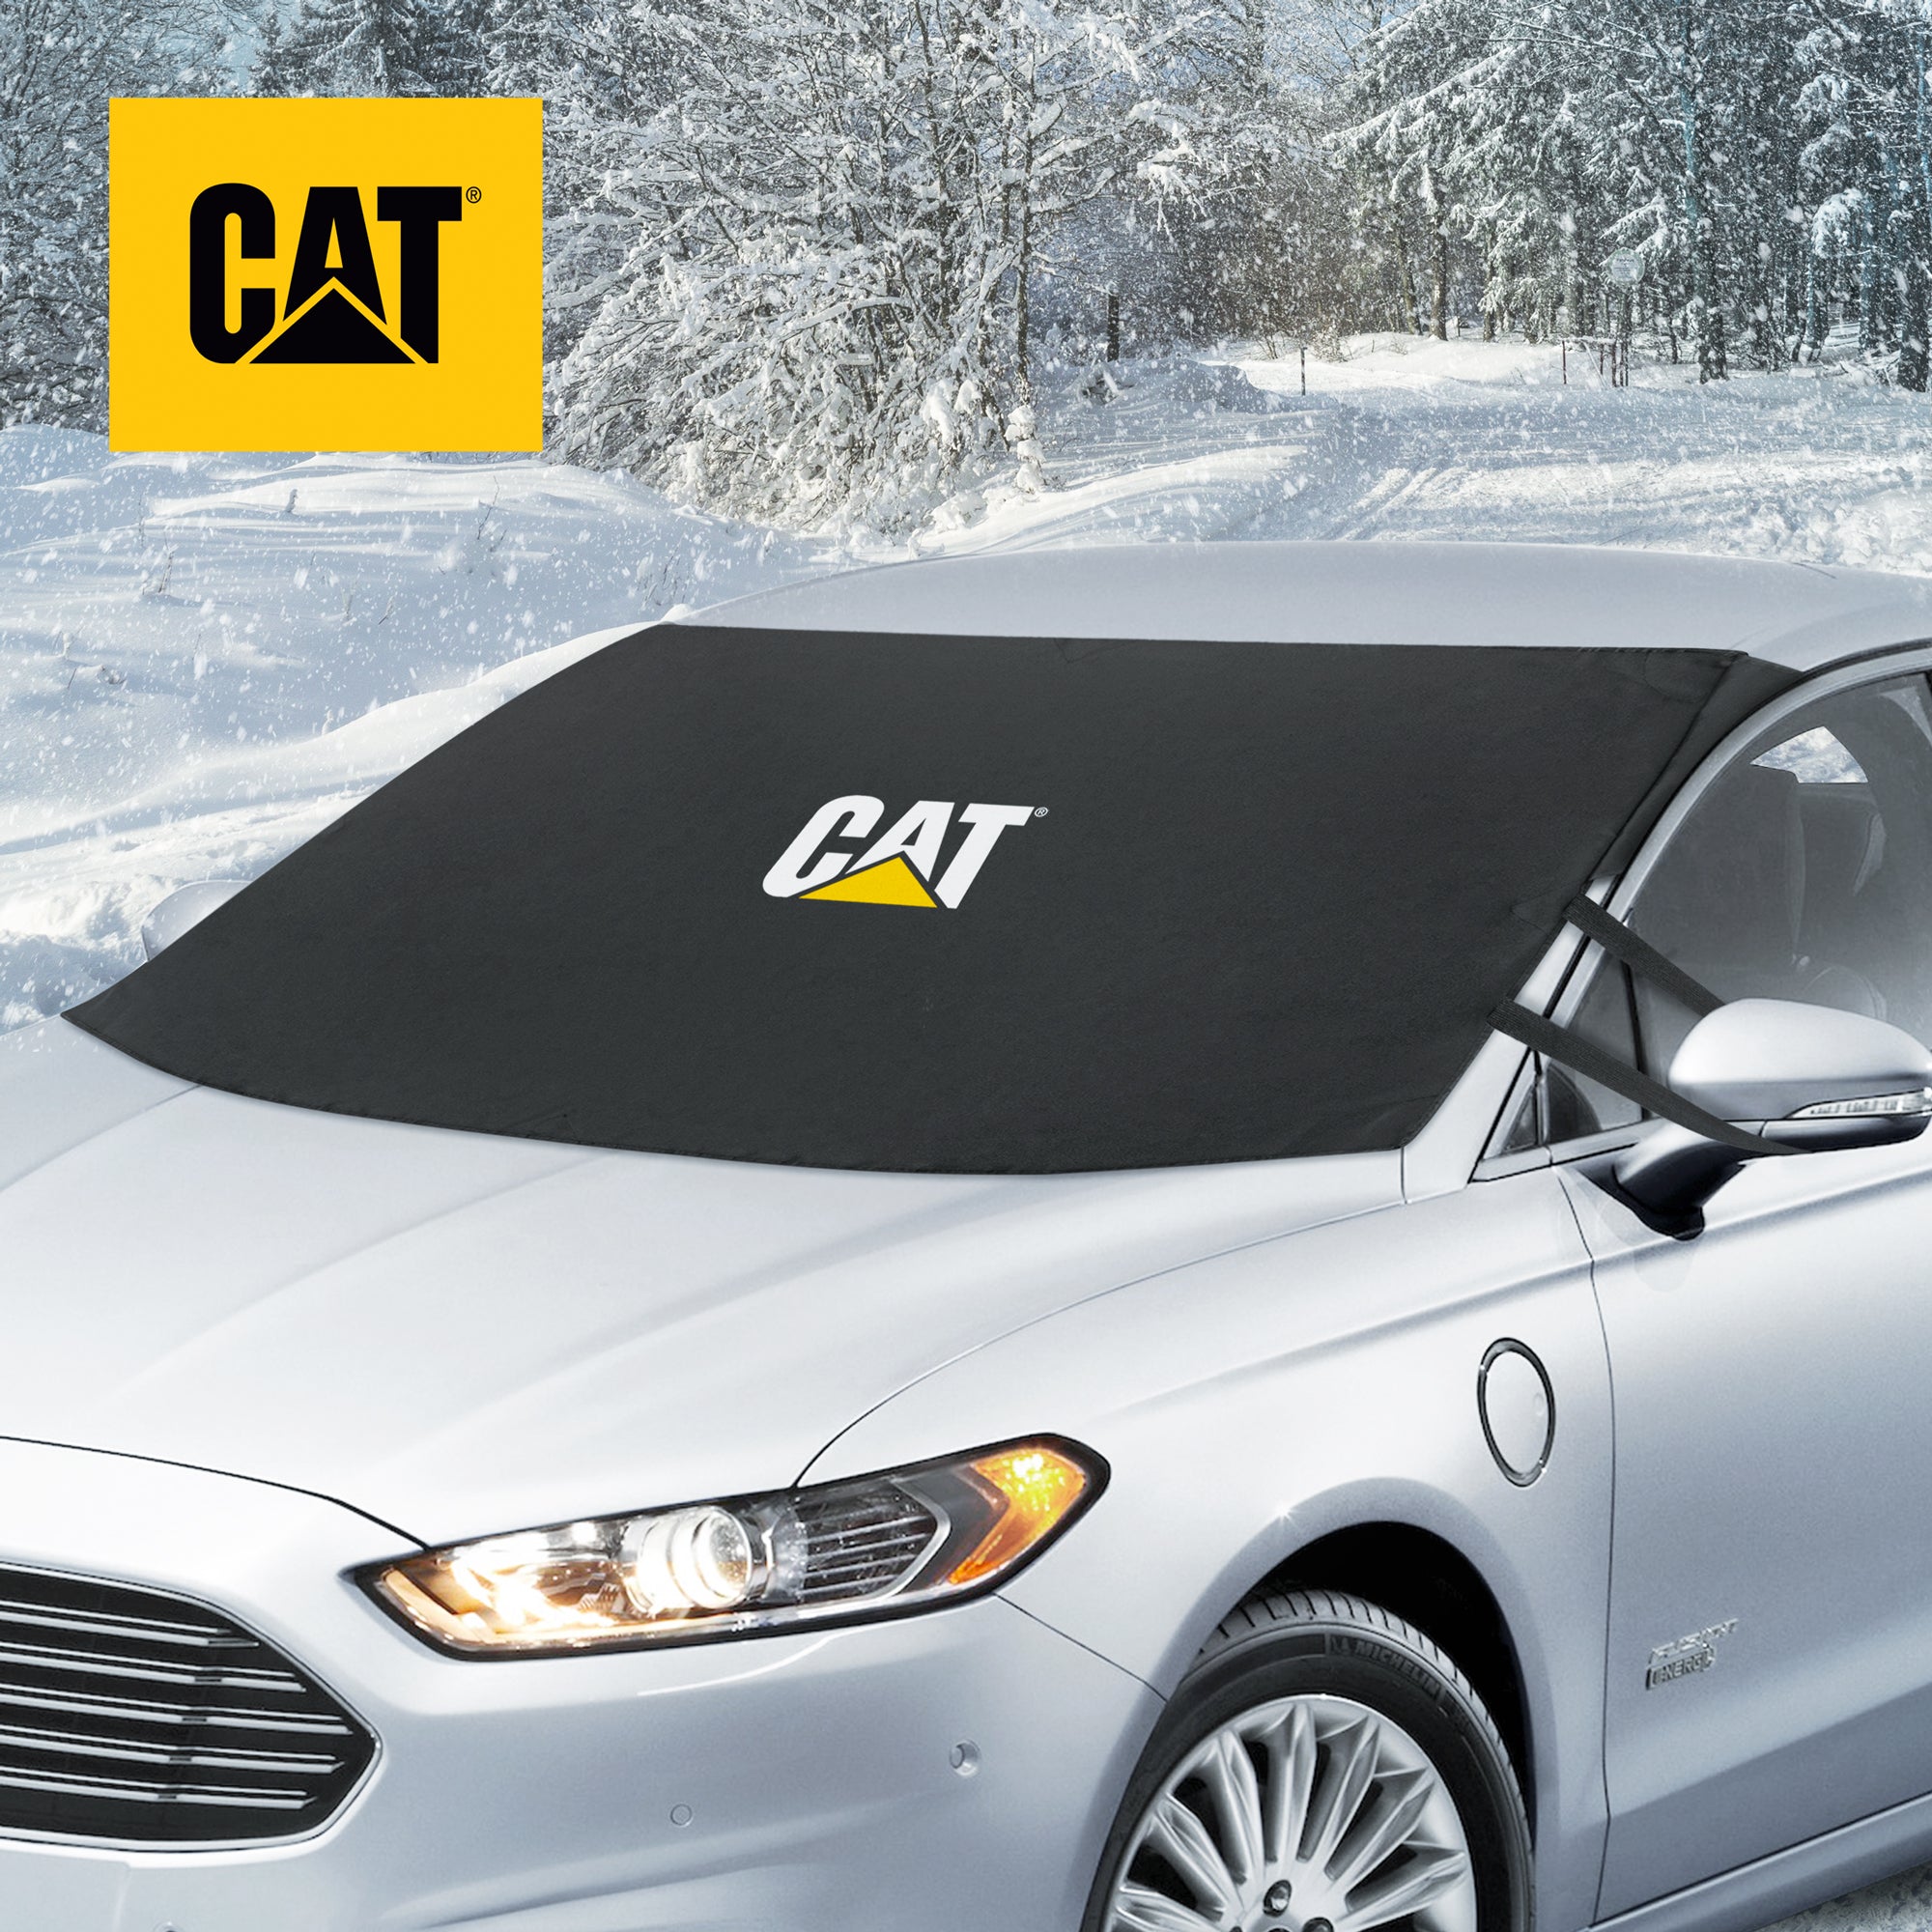 CAT® Windshield Snow Cover, Toughest Car Frost Protector for Ice & Sleet, Weatherproof for Winter, Includes Anti-Theft Straps, Freeze Protector for Auto Car Truck Van SUV, Wide Size 78"x45" inch